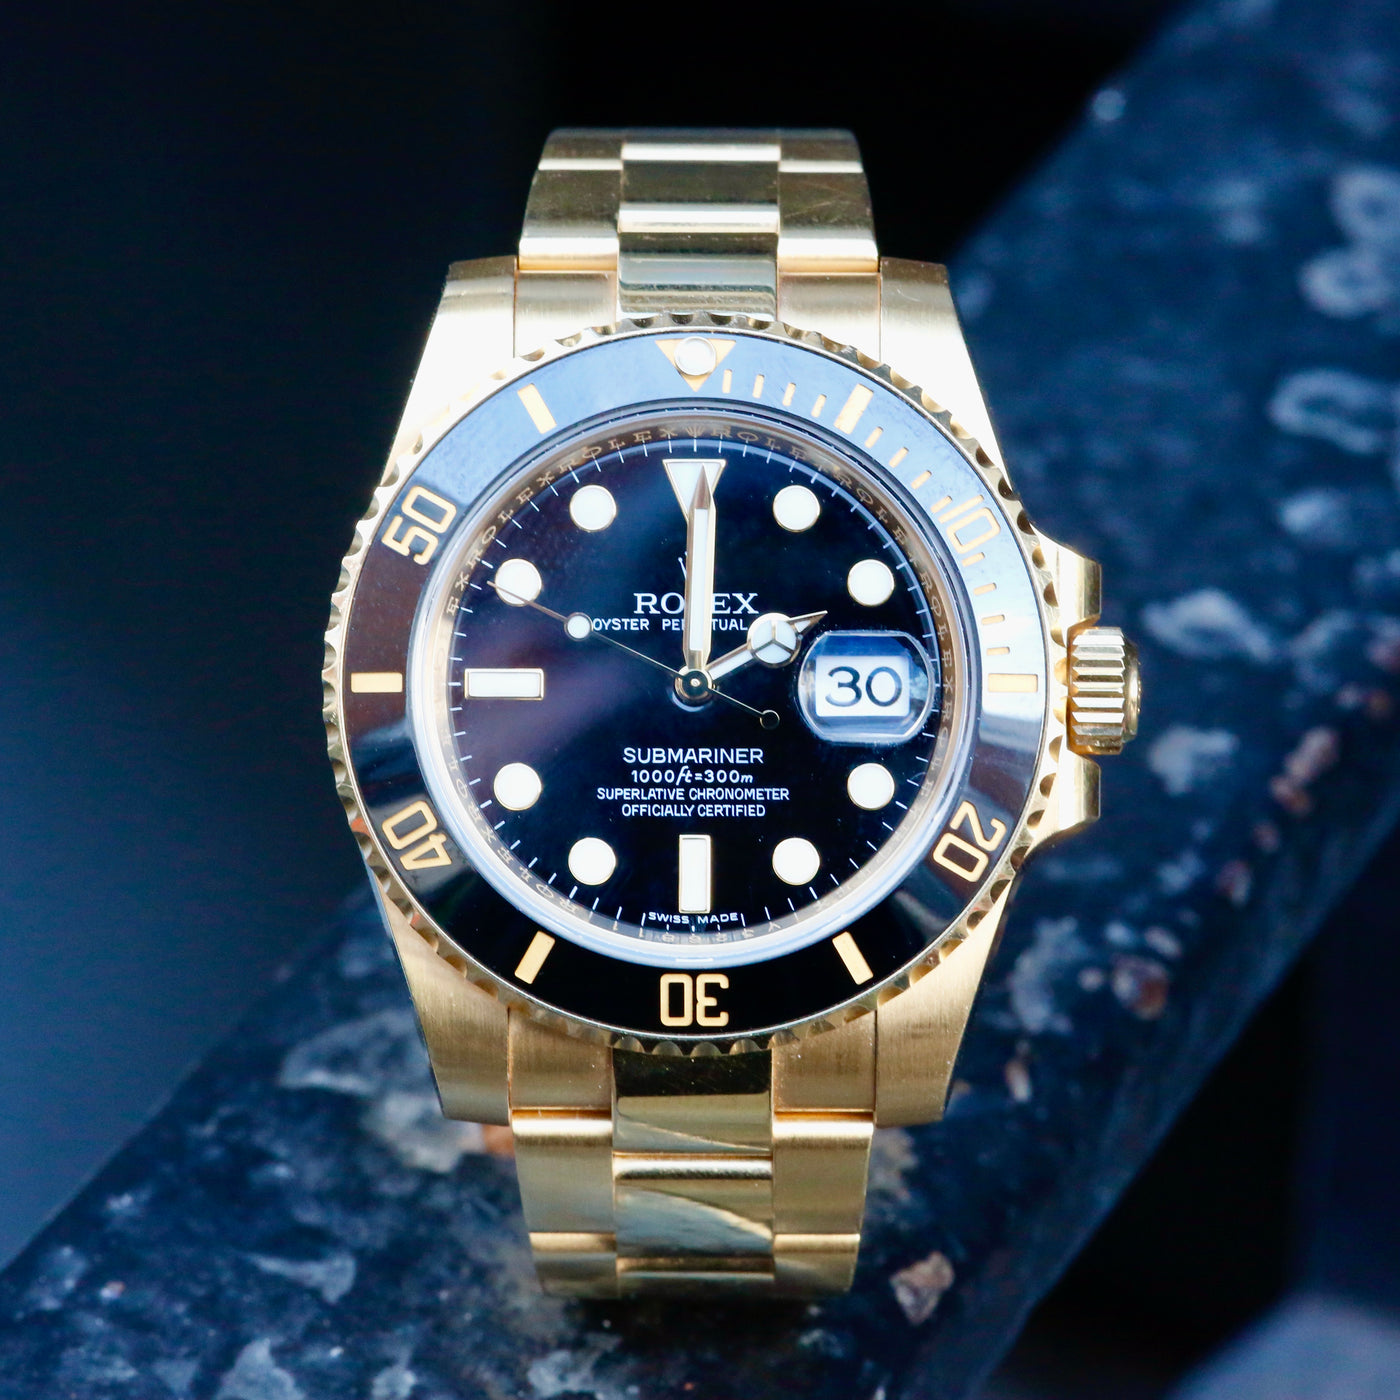 An Iconic Watch In The Rolex Range - The Submariner – lbjwatches